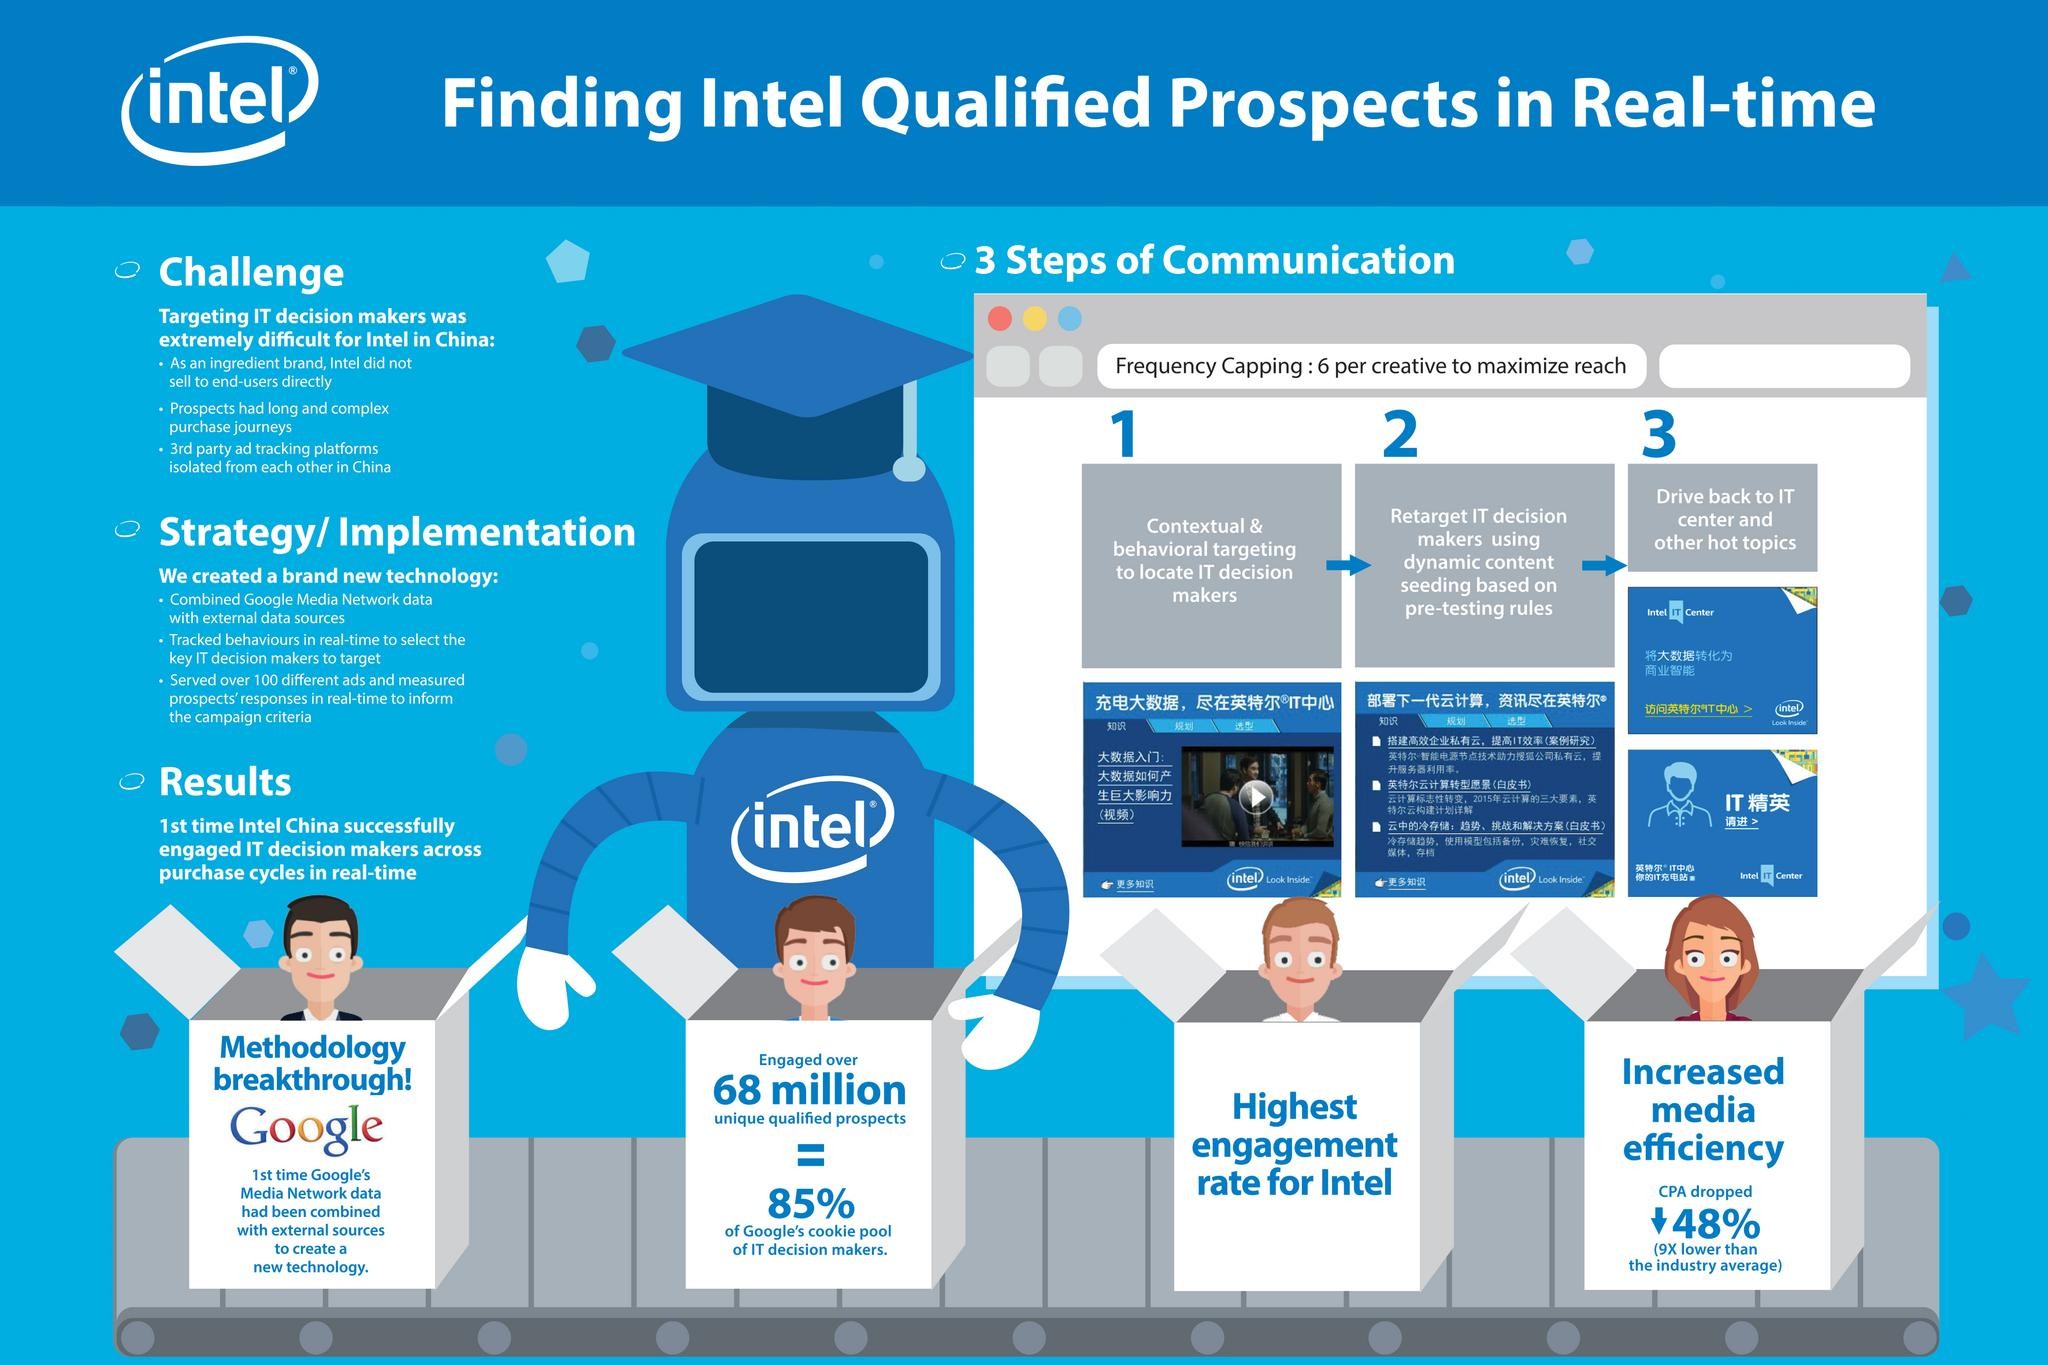 FINDING INTEL QUALIFIED PROSPECTS IN REAL-TIME